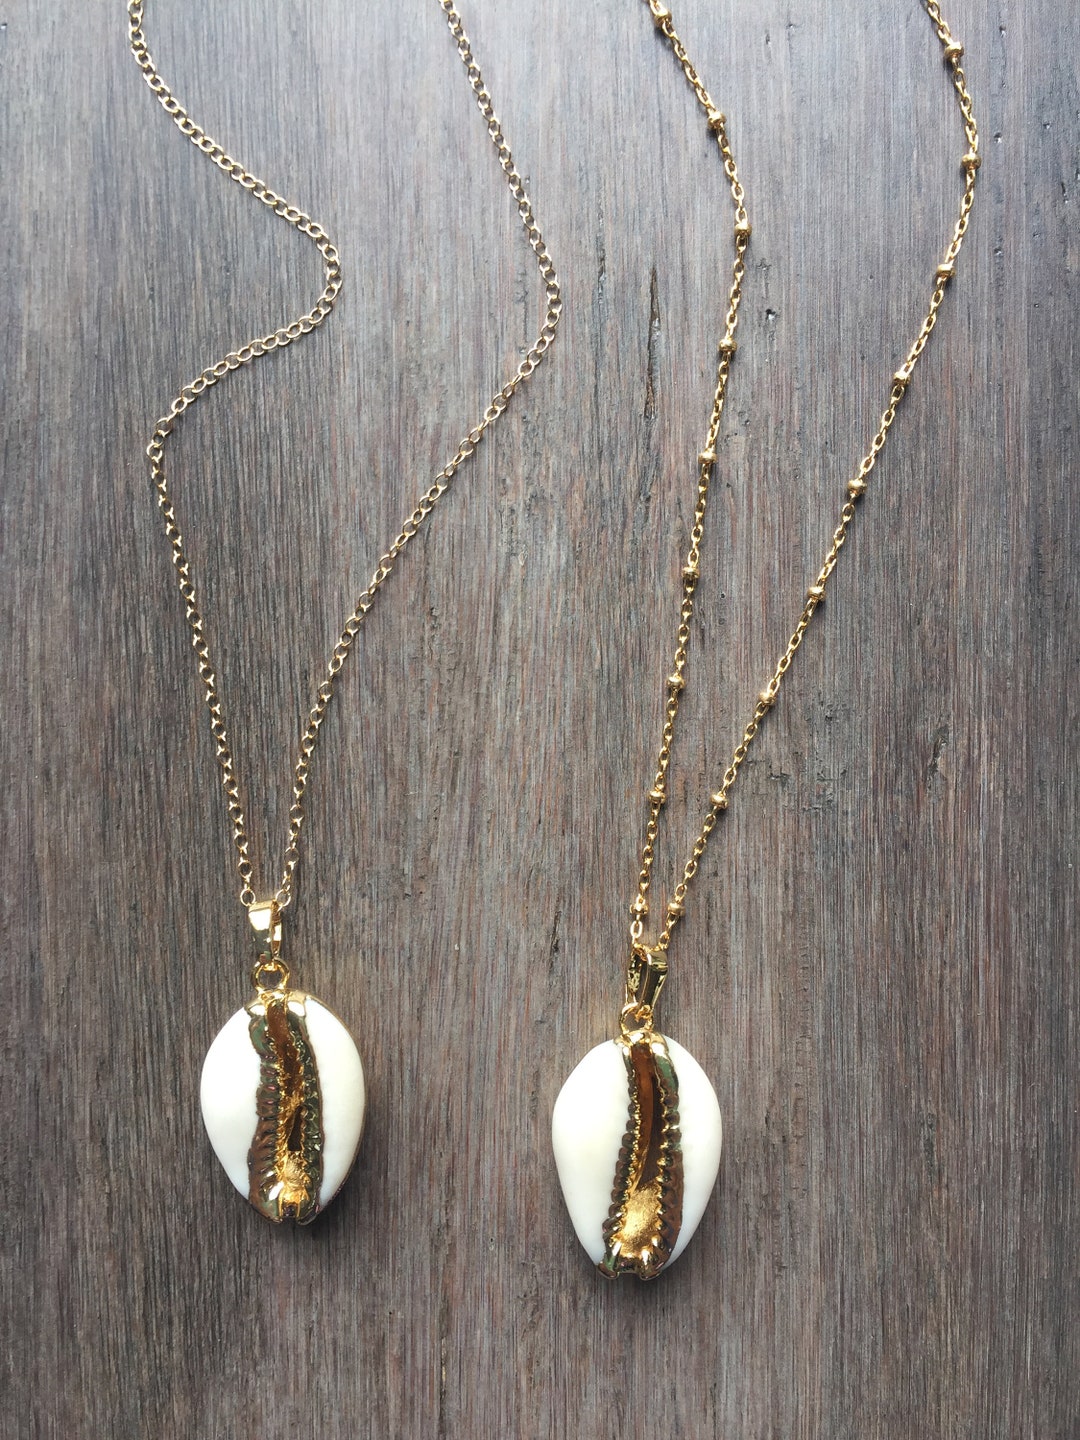 Cowrie Shell Necklace, Gold Shell Necklace, Gold Cowrie Shell, Boho ...